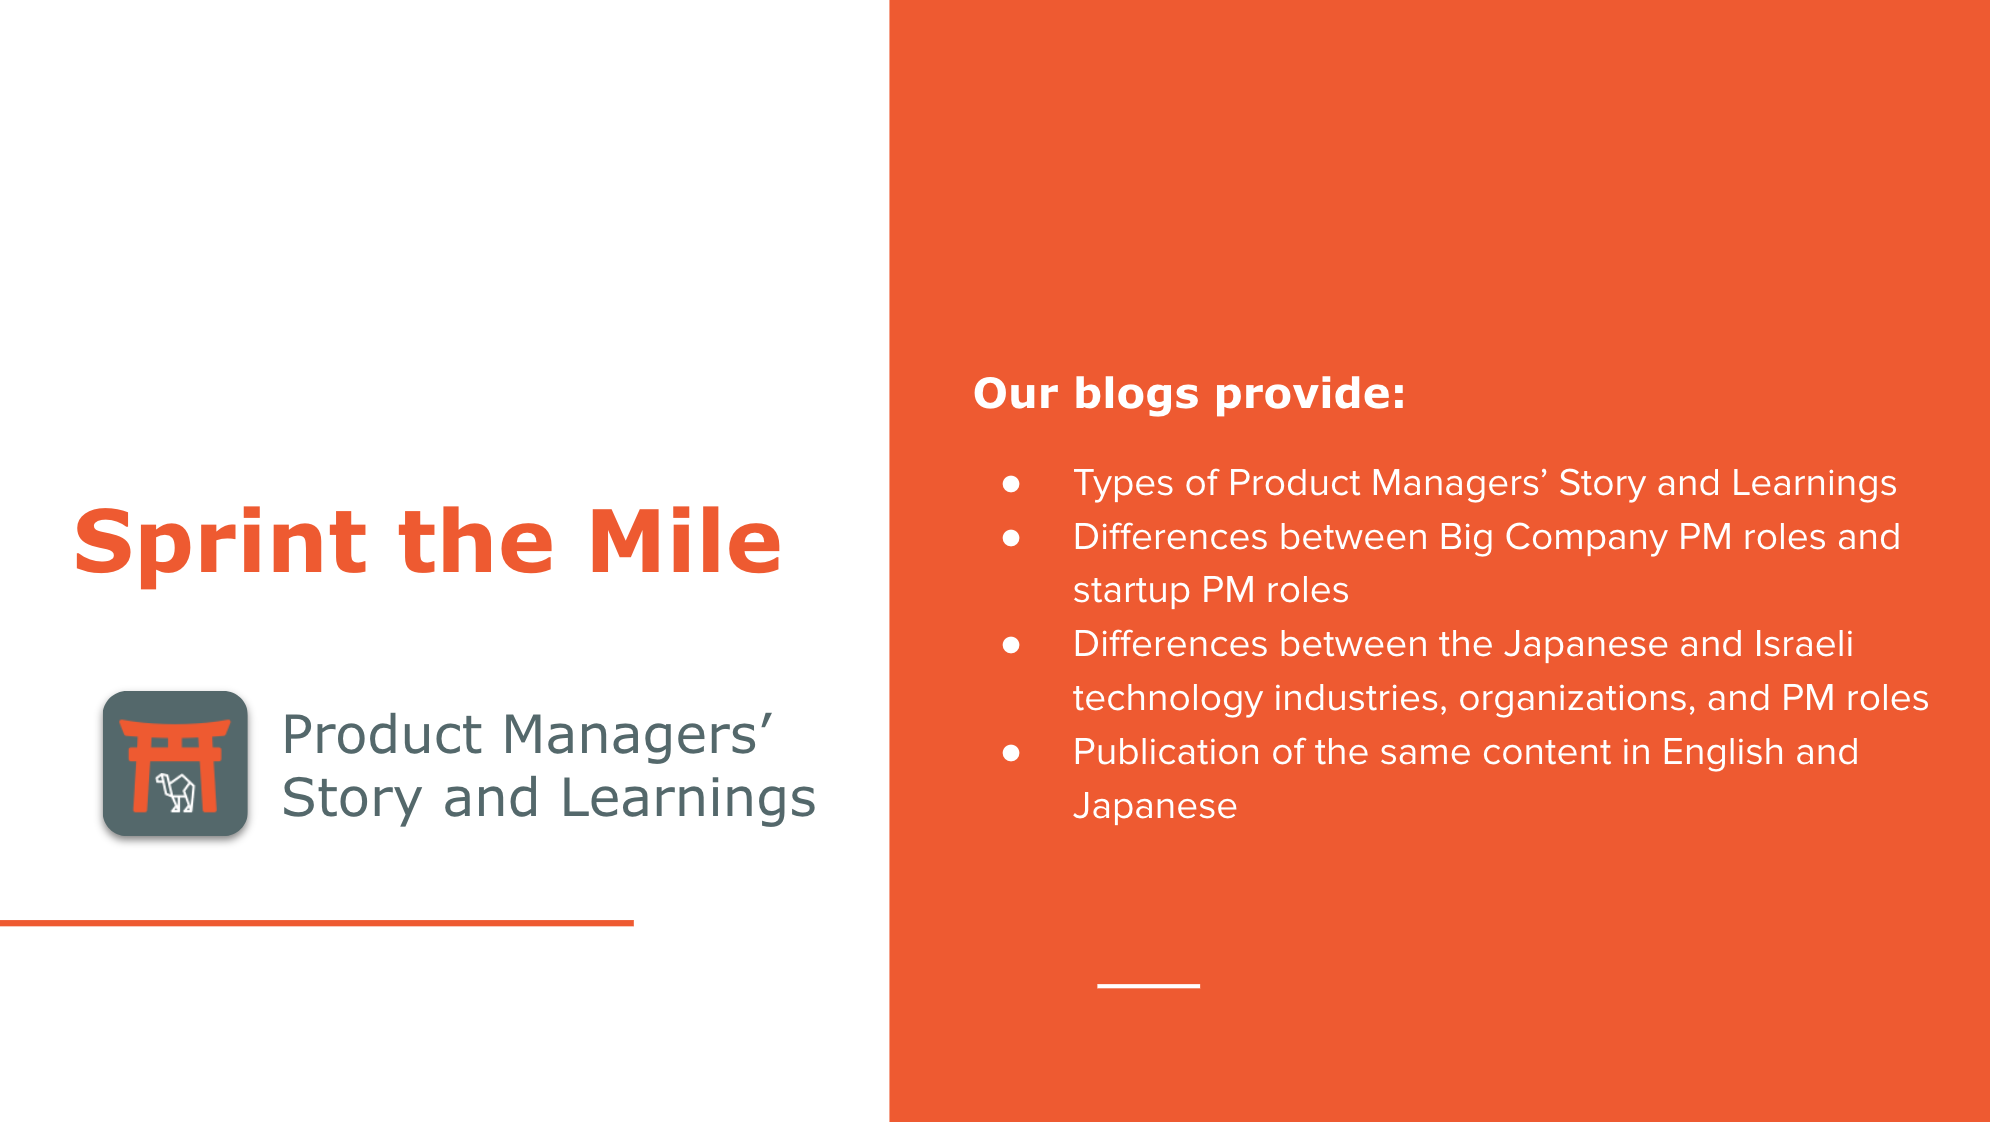 Why did we start this new blog “Sprint the Mile”?